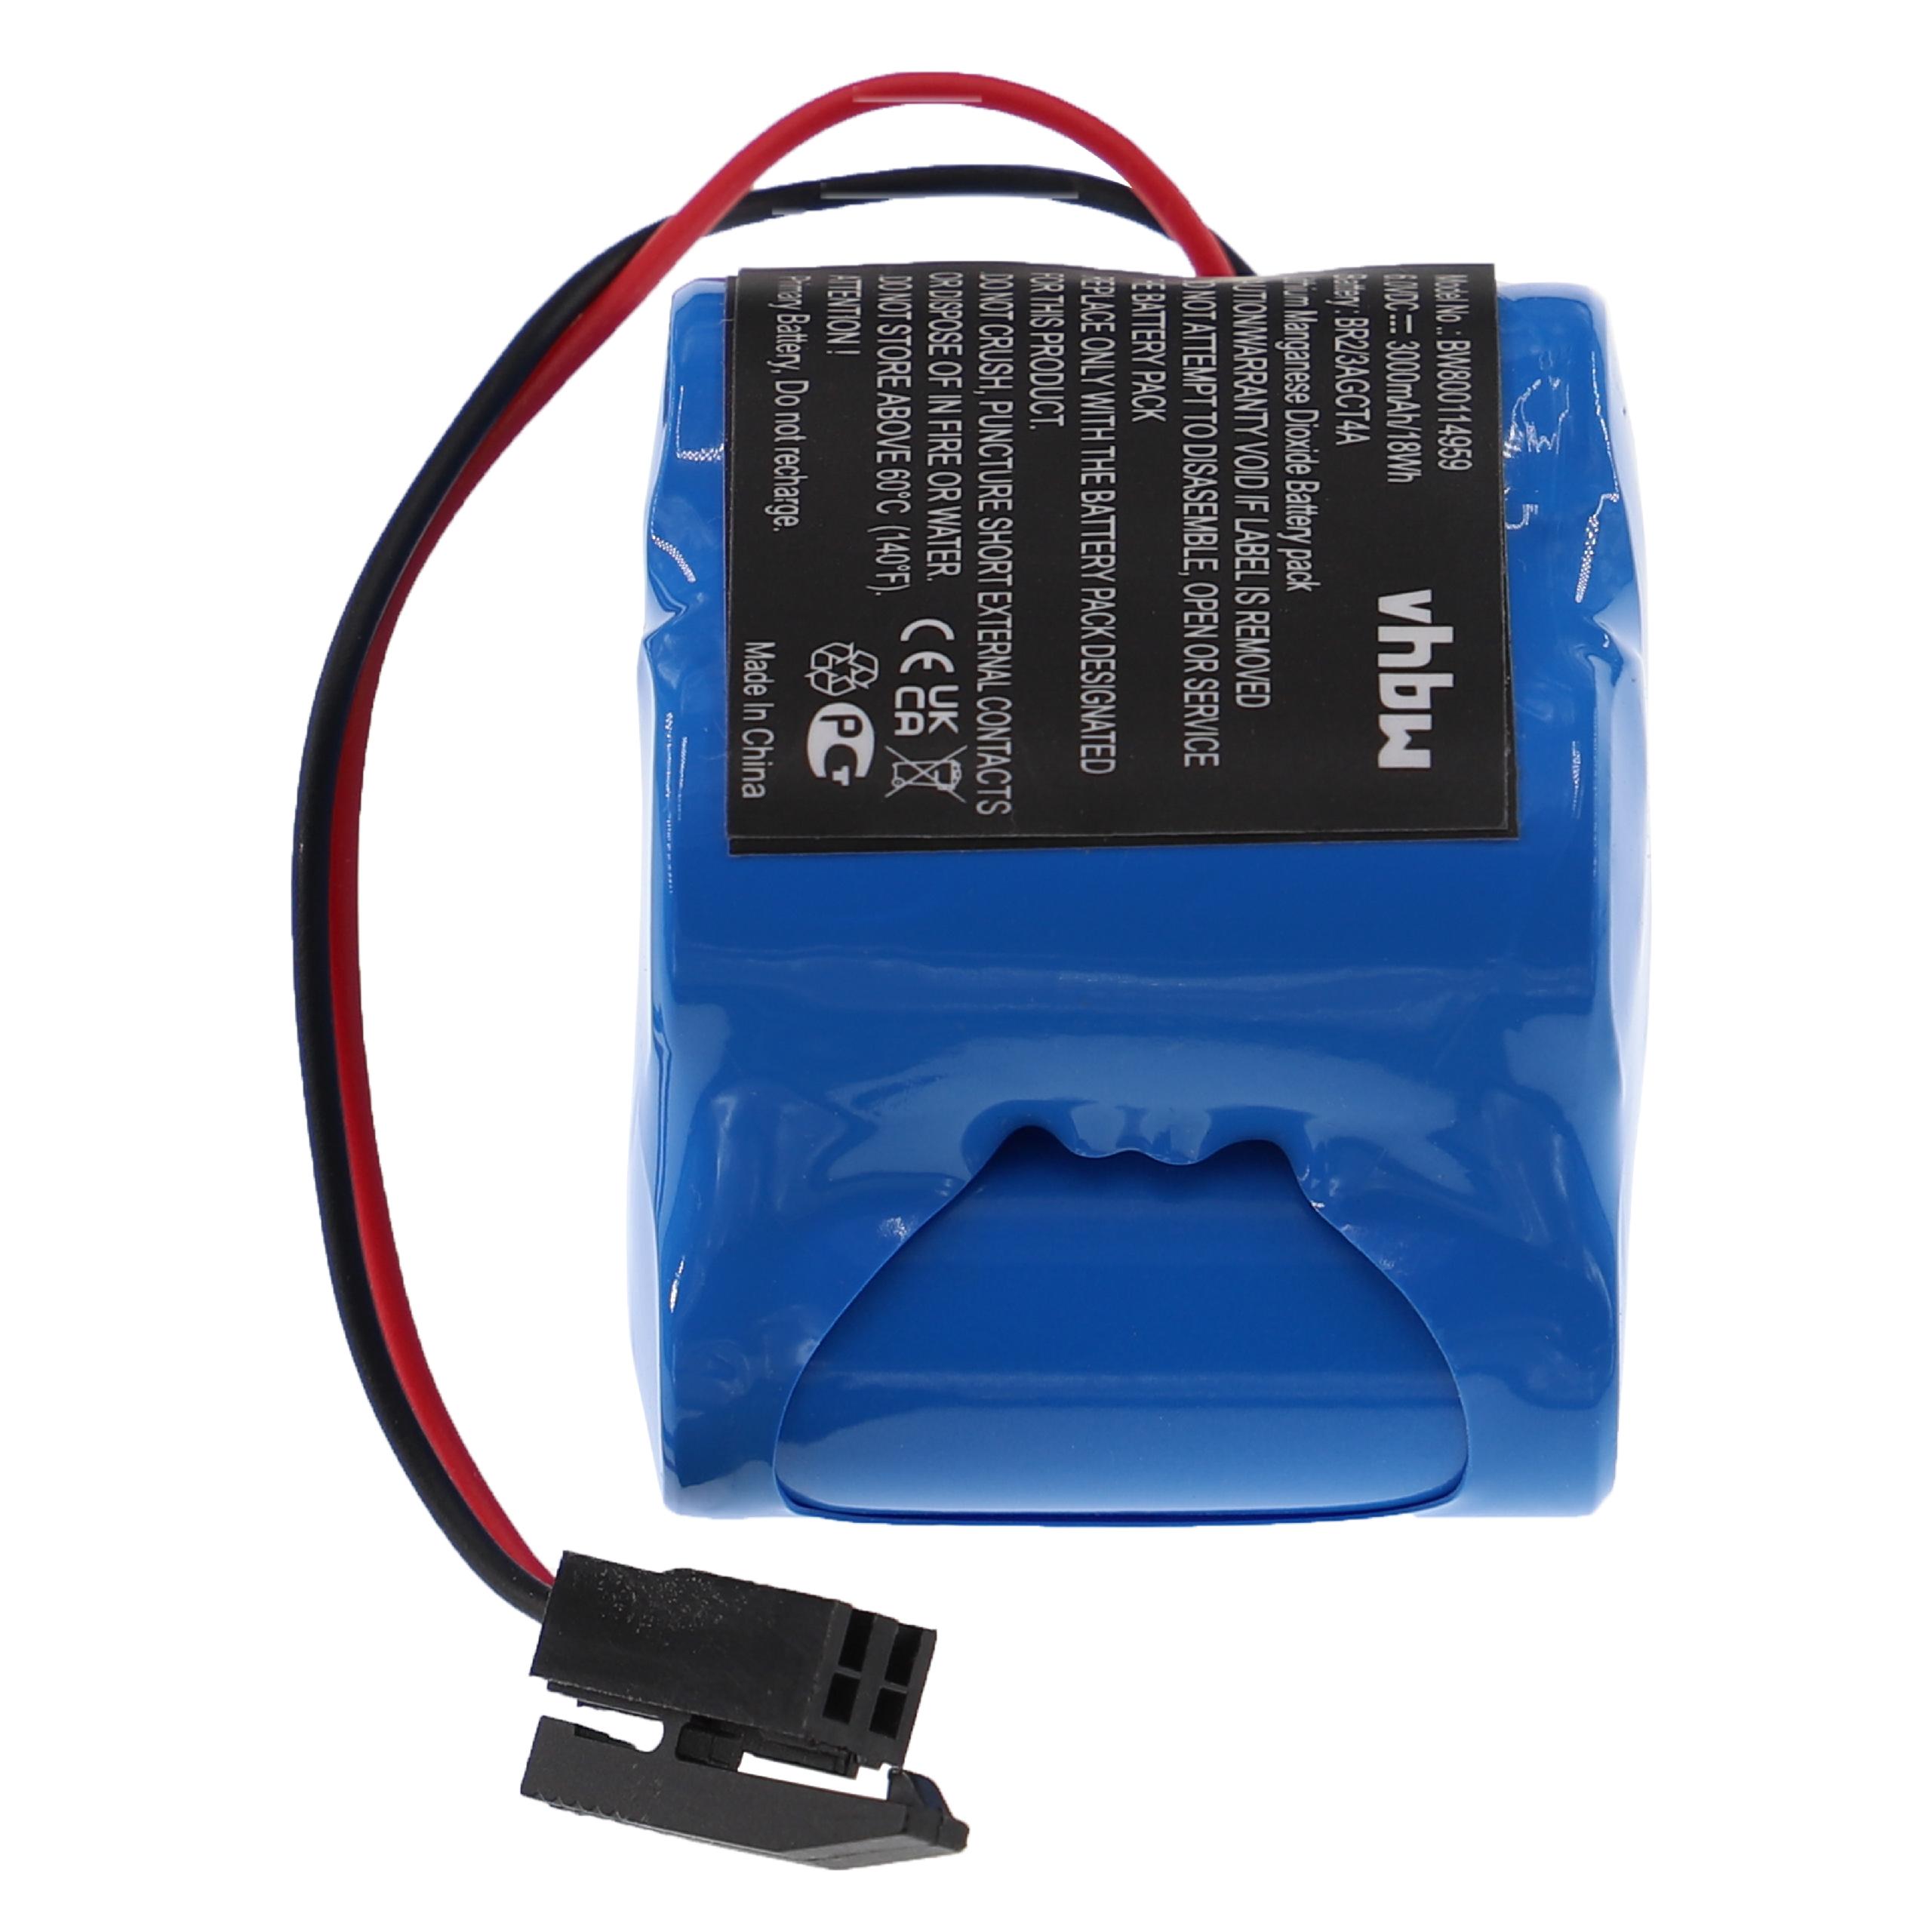 Industrial Controller Battery Replacement for A06B-6114-K504, A98L-0031-0025 - 3000mAh 6V Li-MnO2